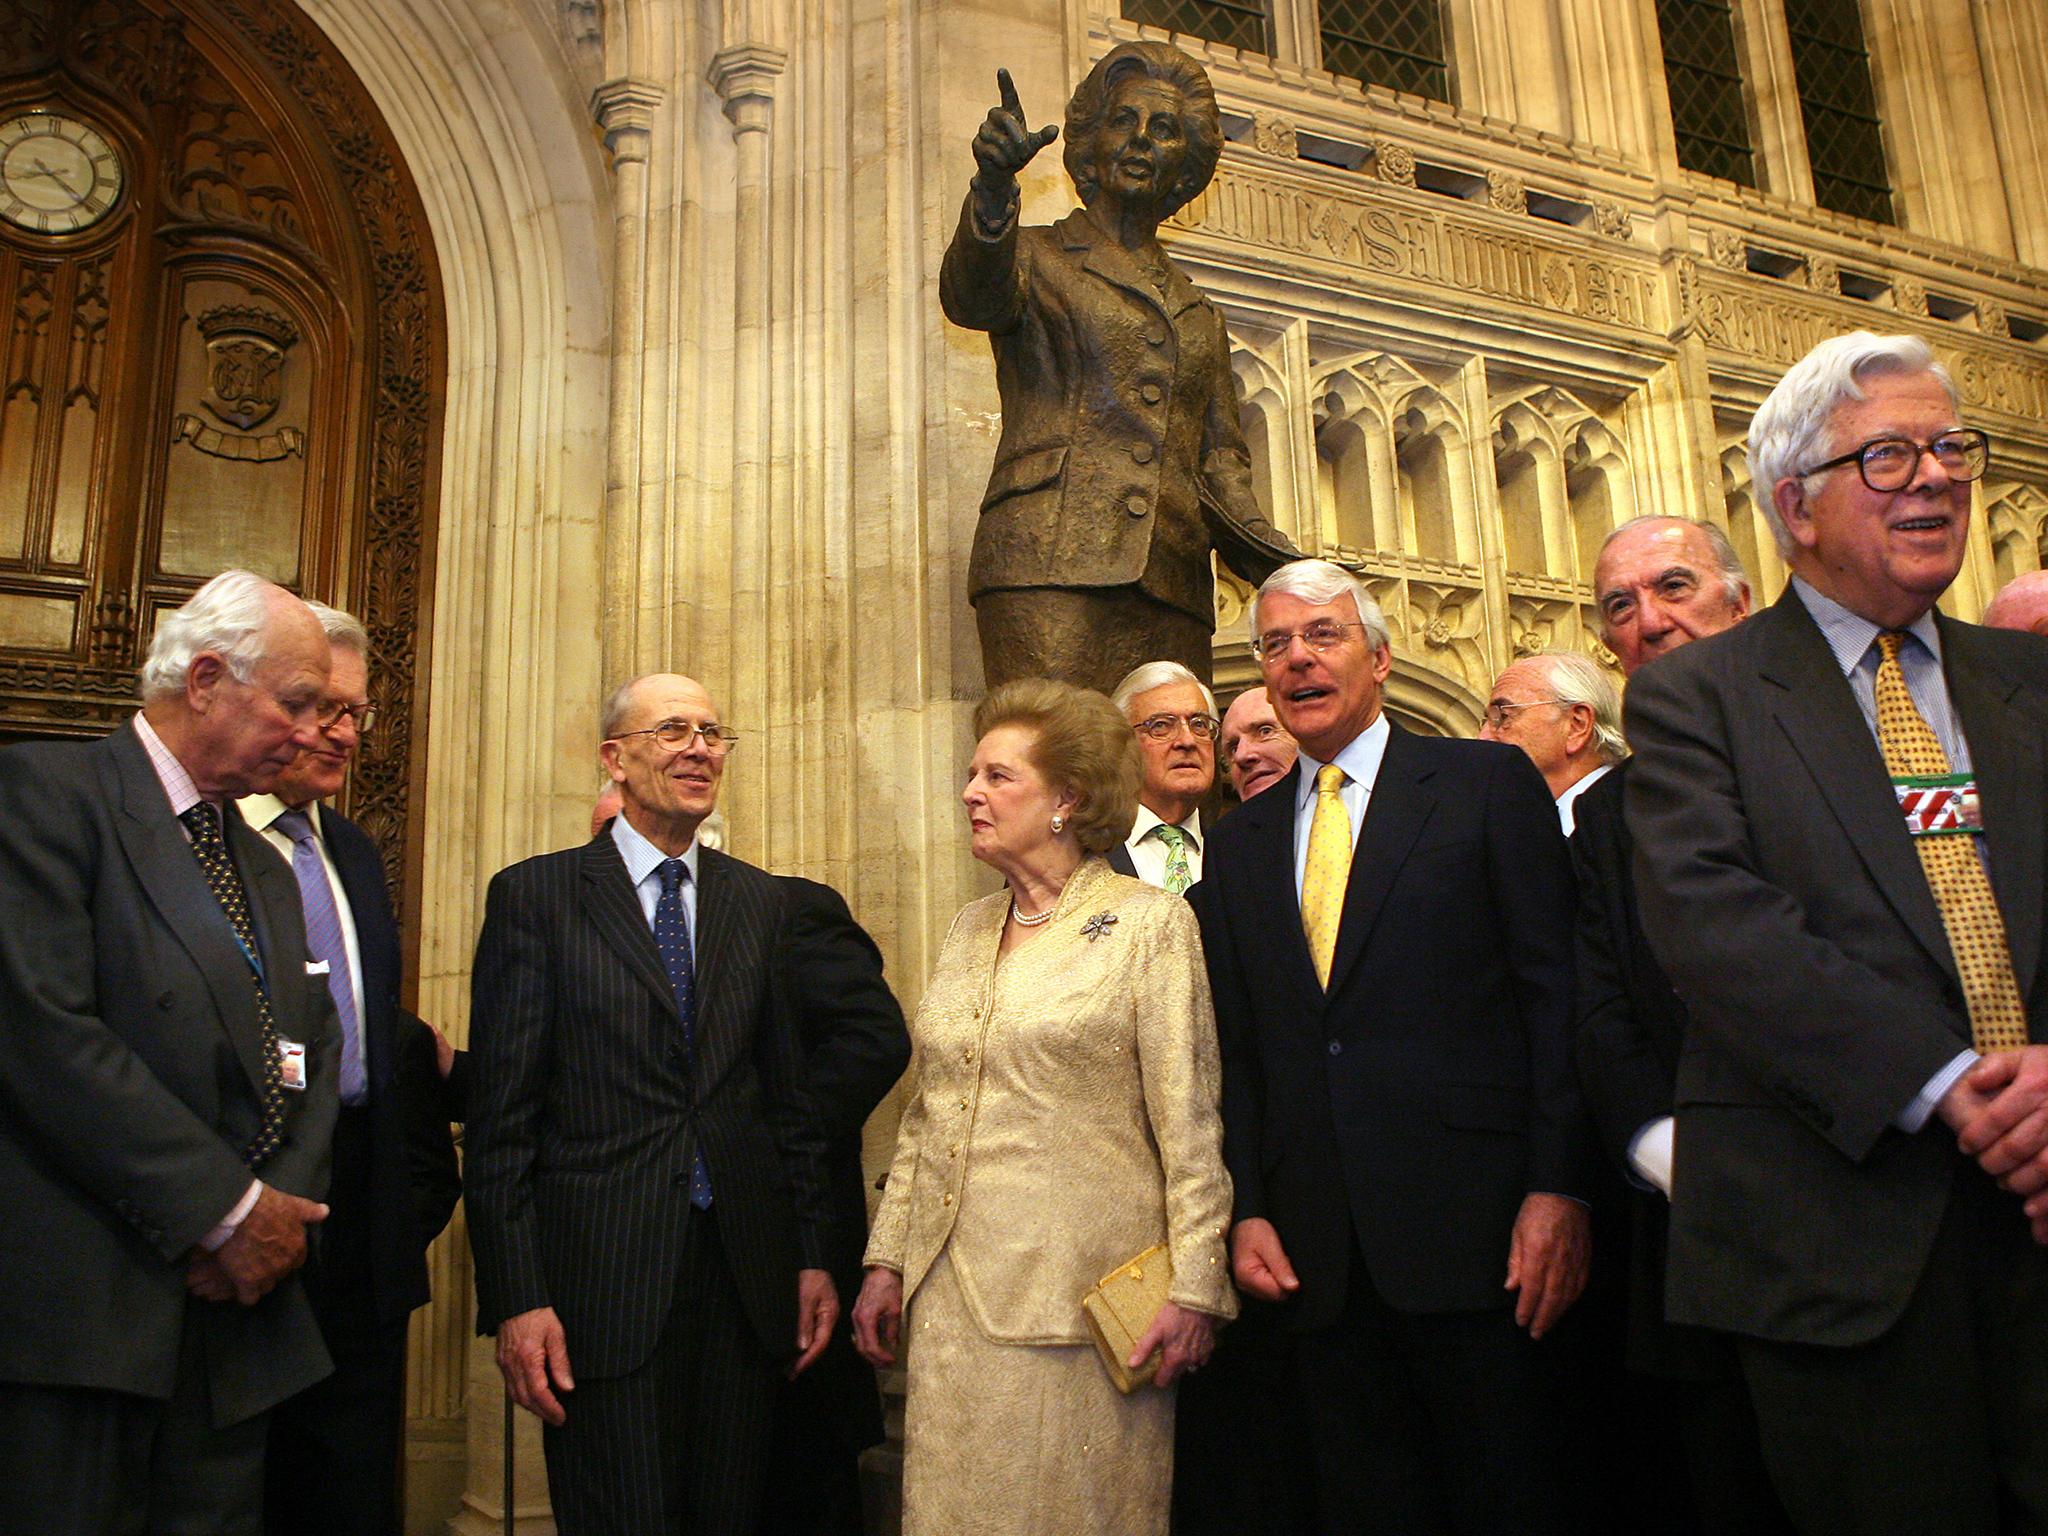 A full-length bronze statue of Baroness Thatcher was unveiled in Westminster in February 2007